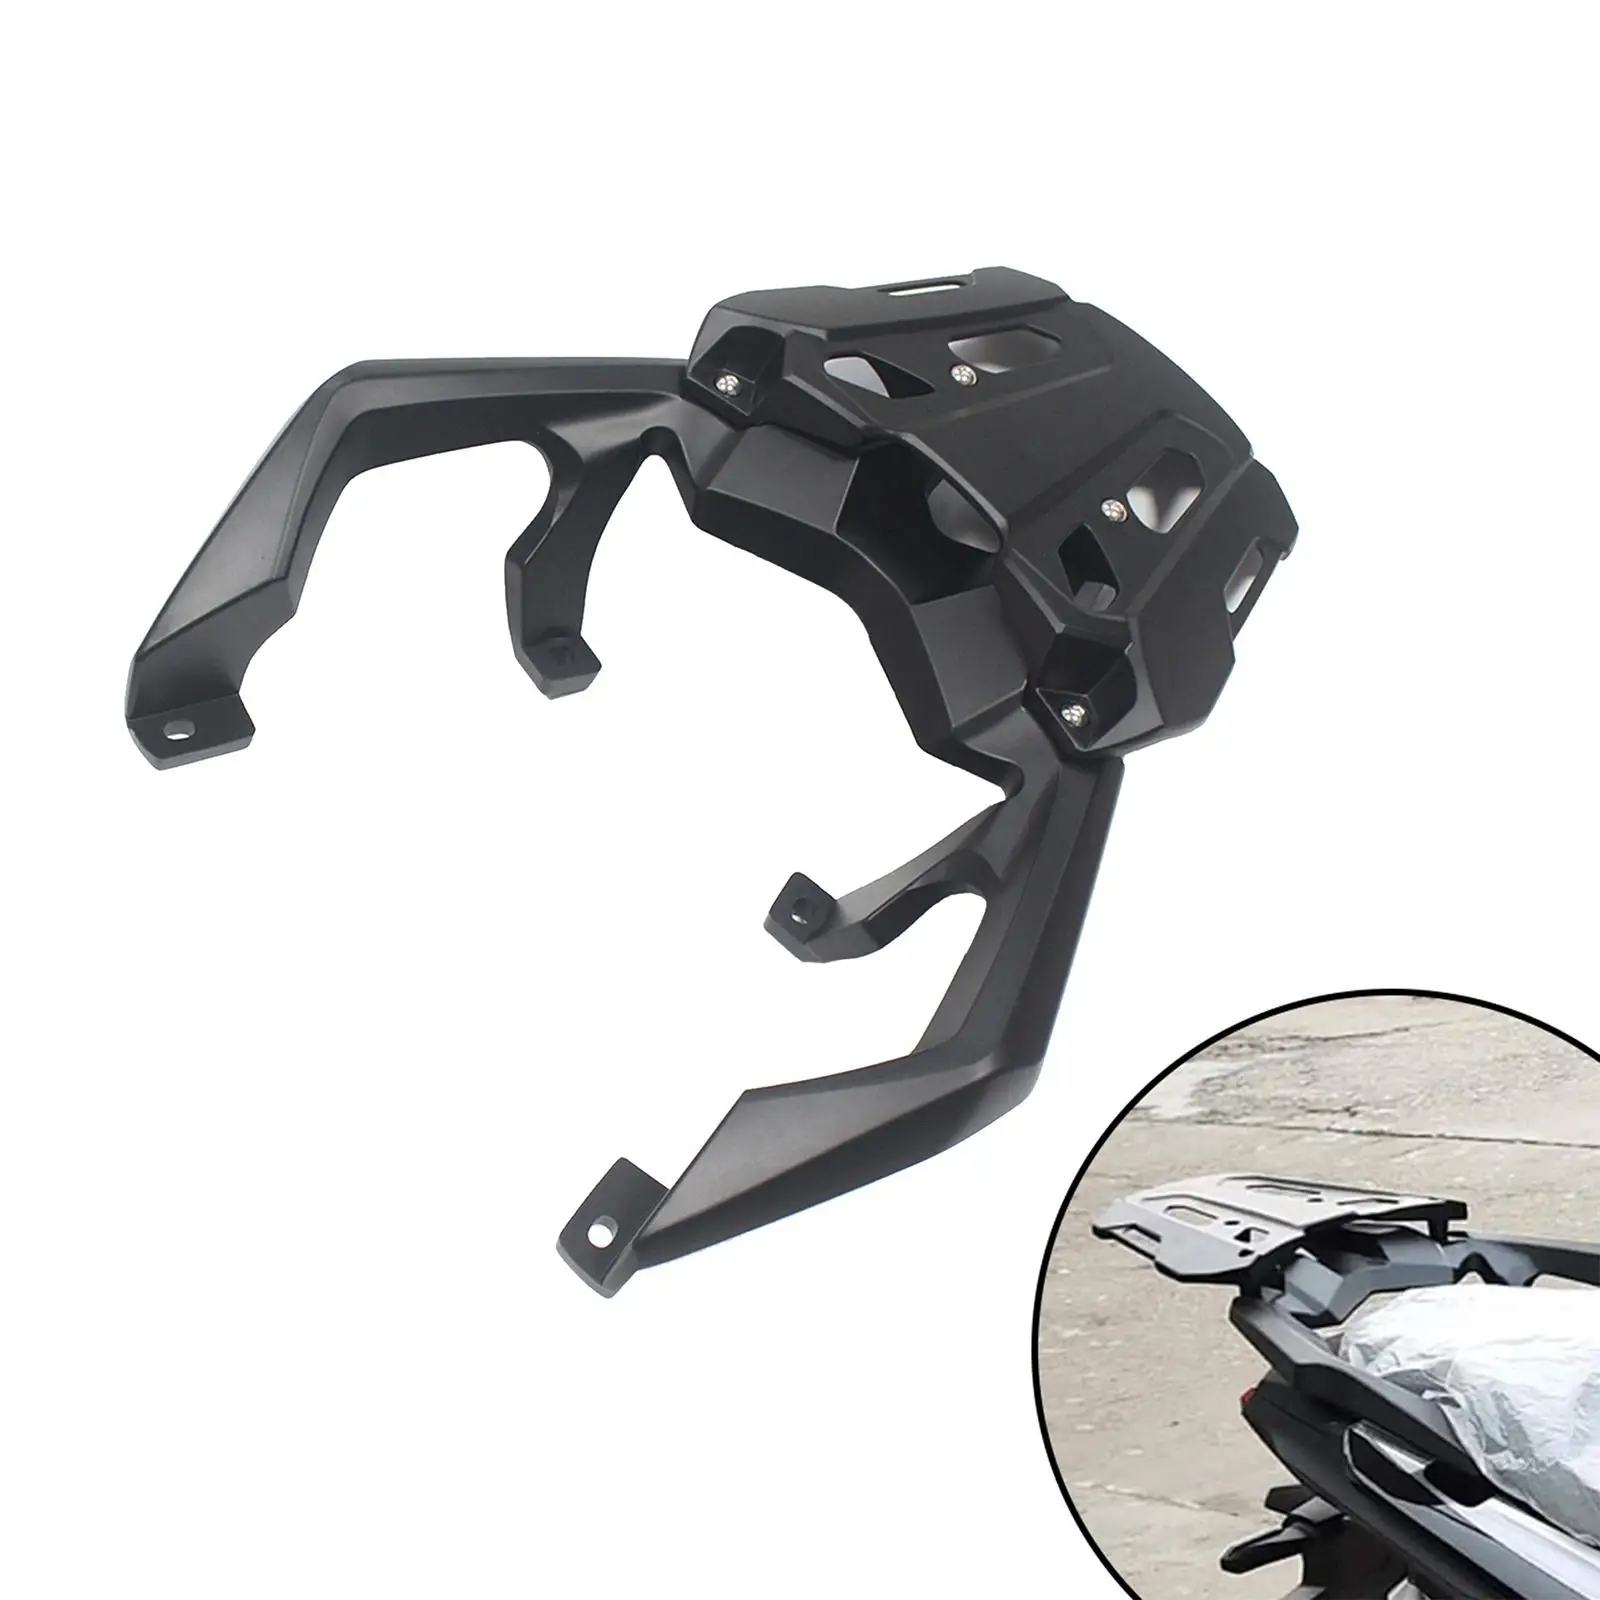 Black Rear Luggage Rack Seat Holder Bracket for Replacement